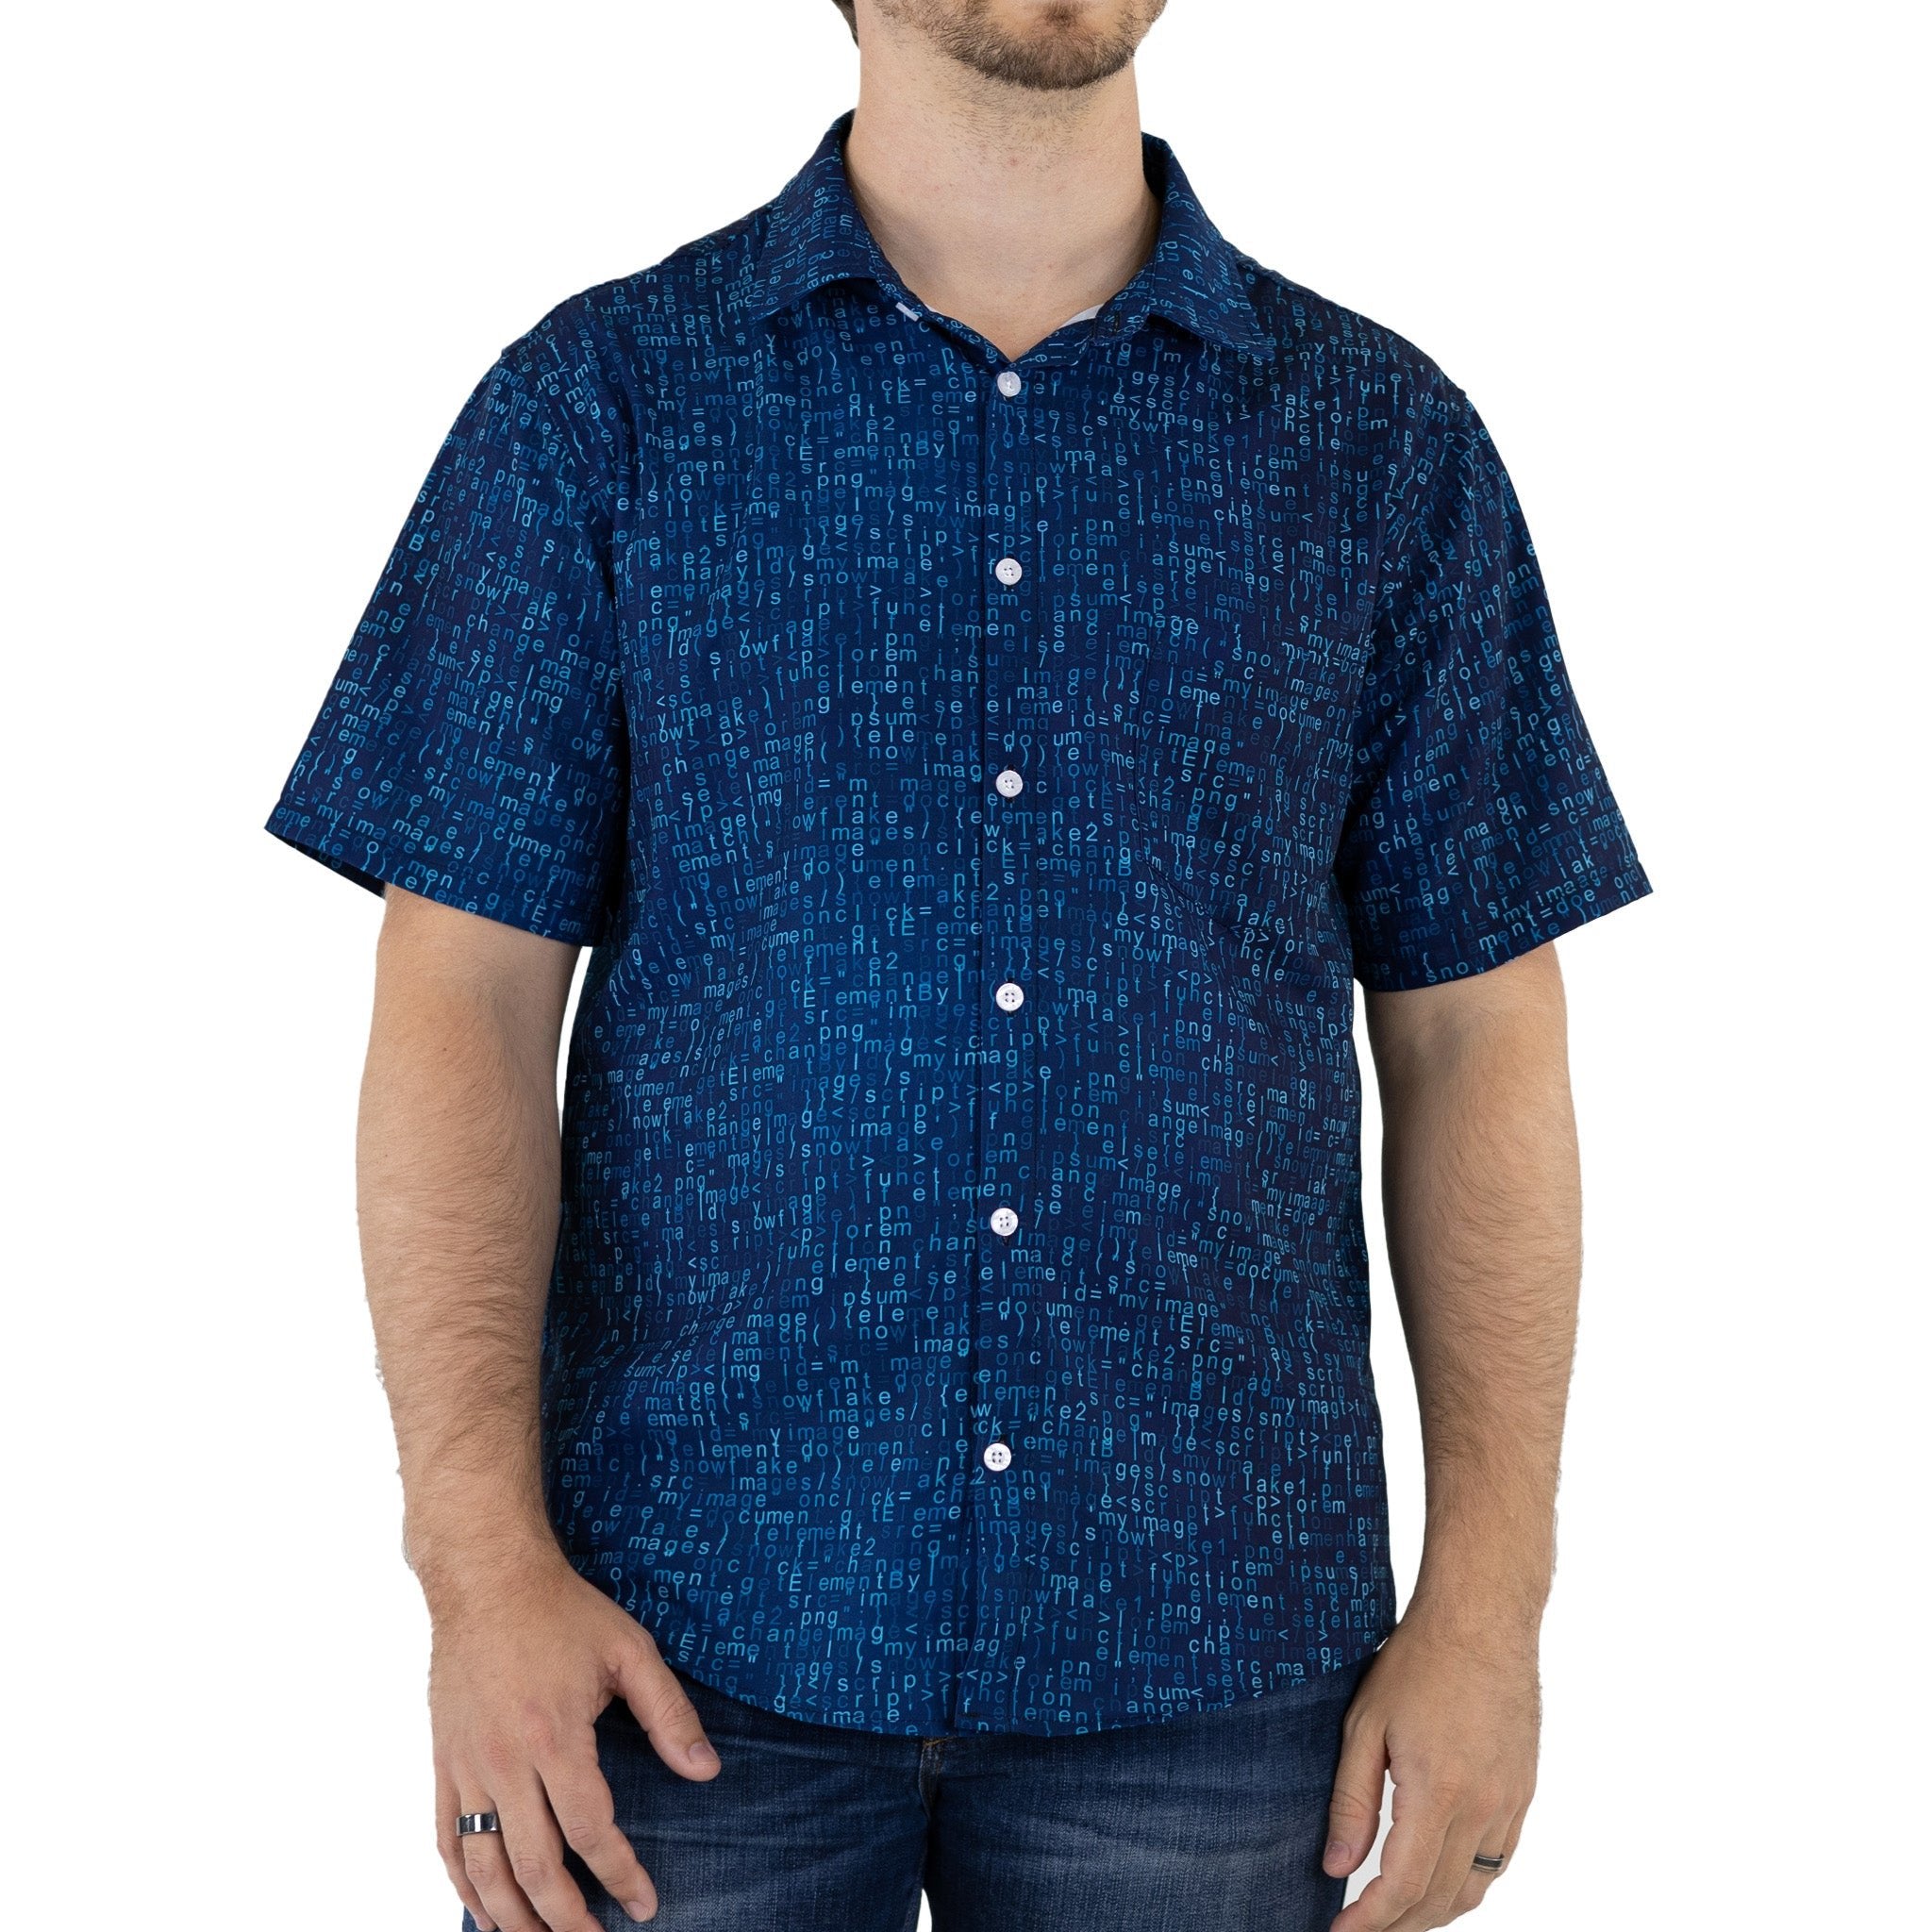 Javascript Computer Code Blue Button Up Shirt - adult sizing - computer print - Simple Patterns